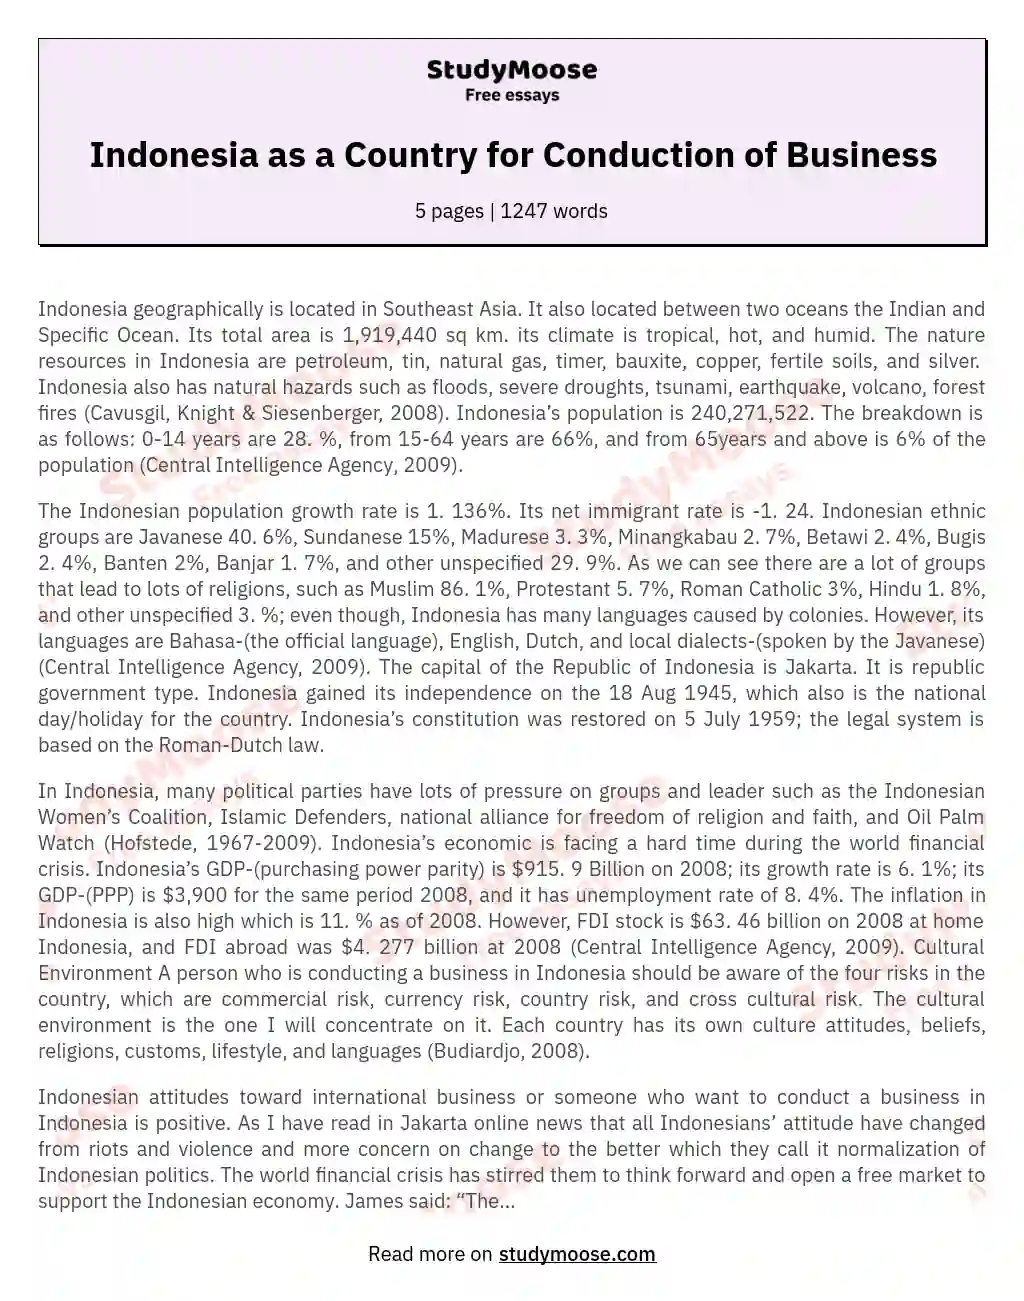 Indonesia as a Country for Conduction of Business